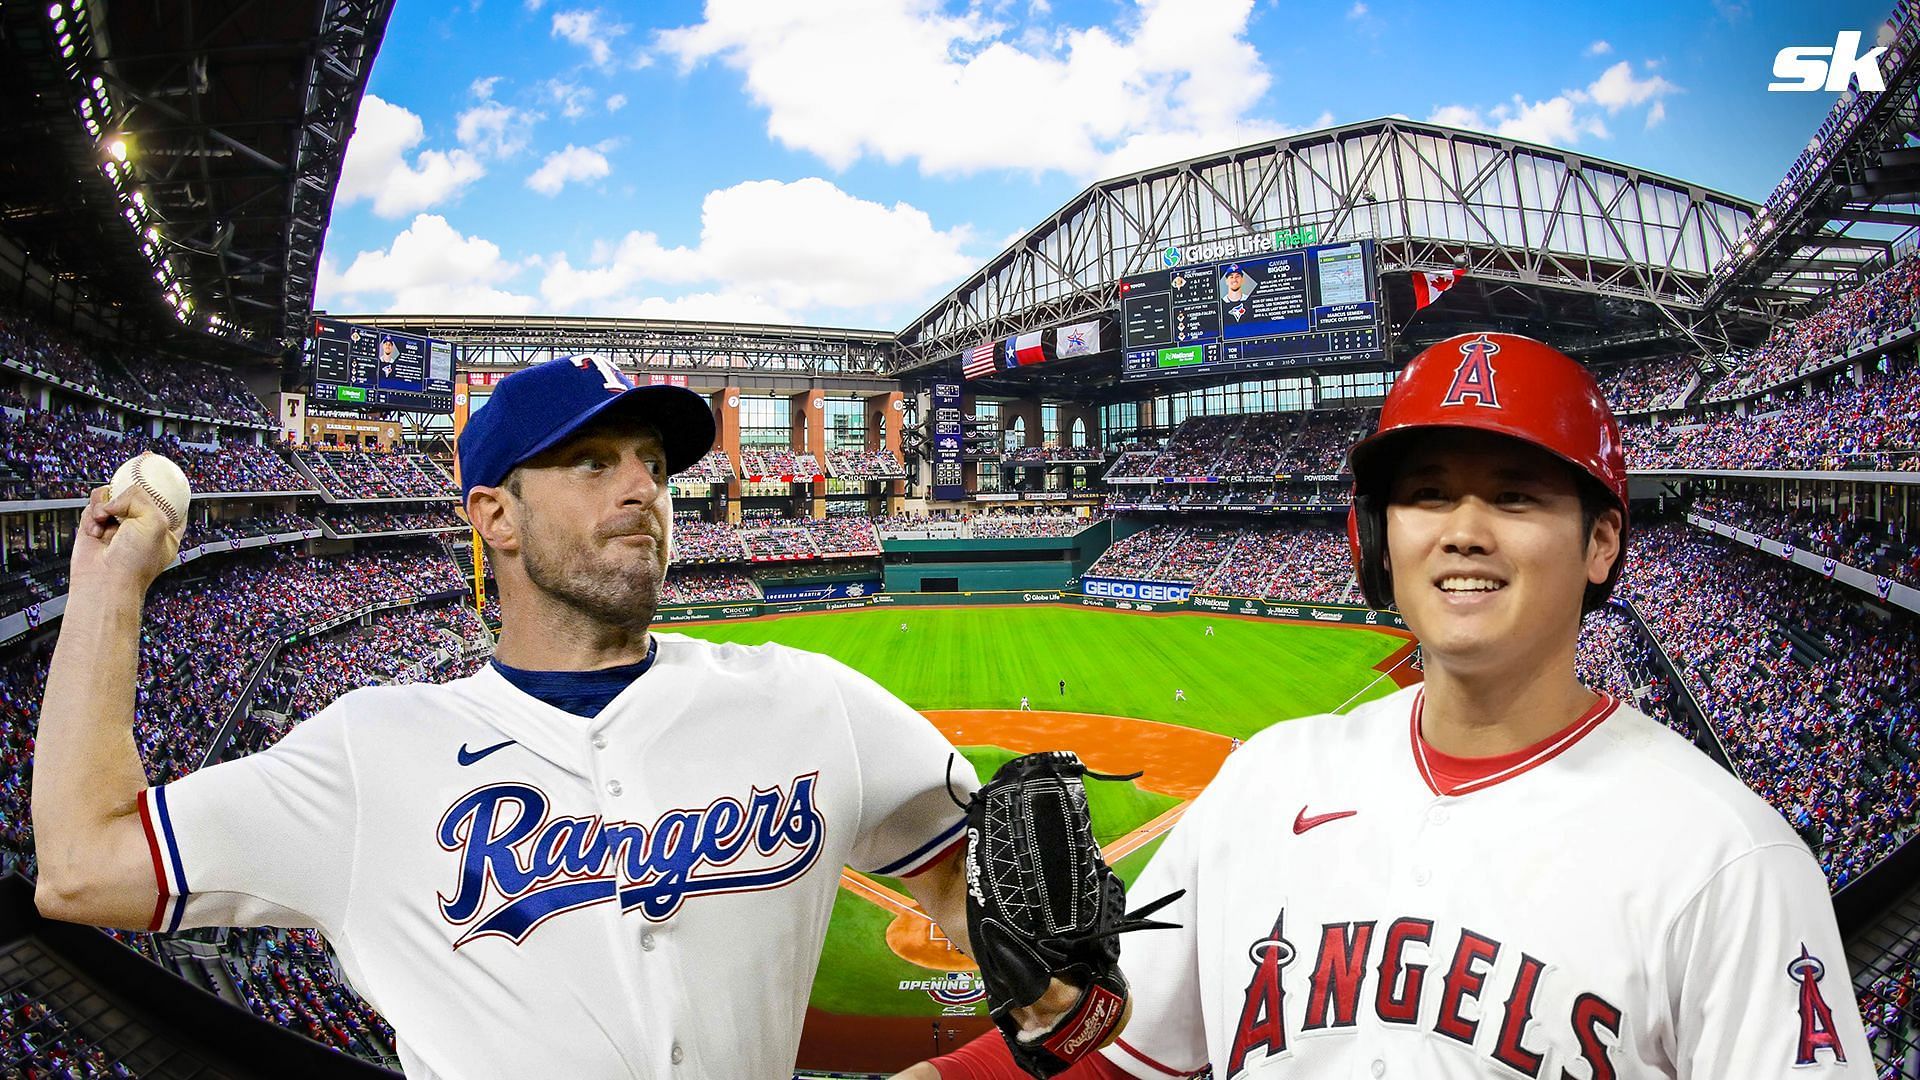 Max Scherzer has extended a simple, but thought-provoking invitation for Shohei Ohtani to come to Texas